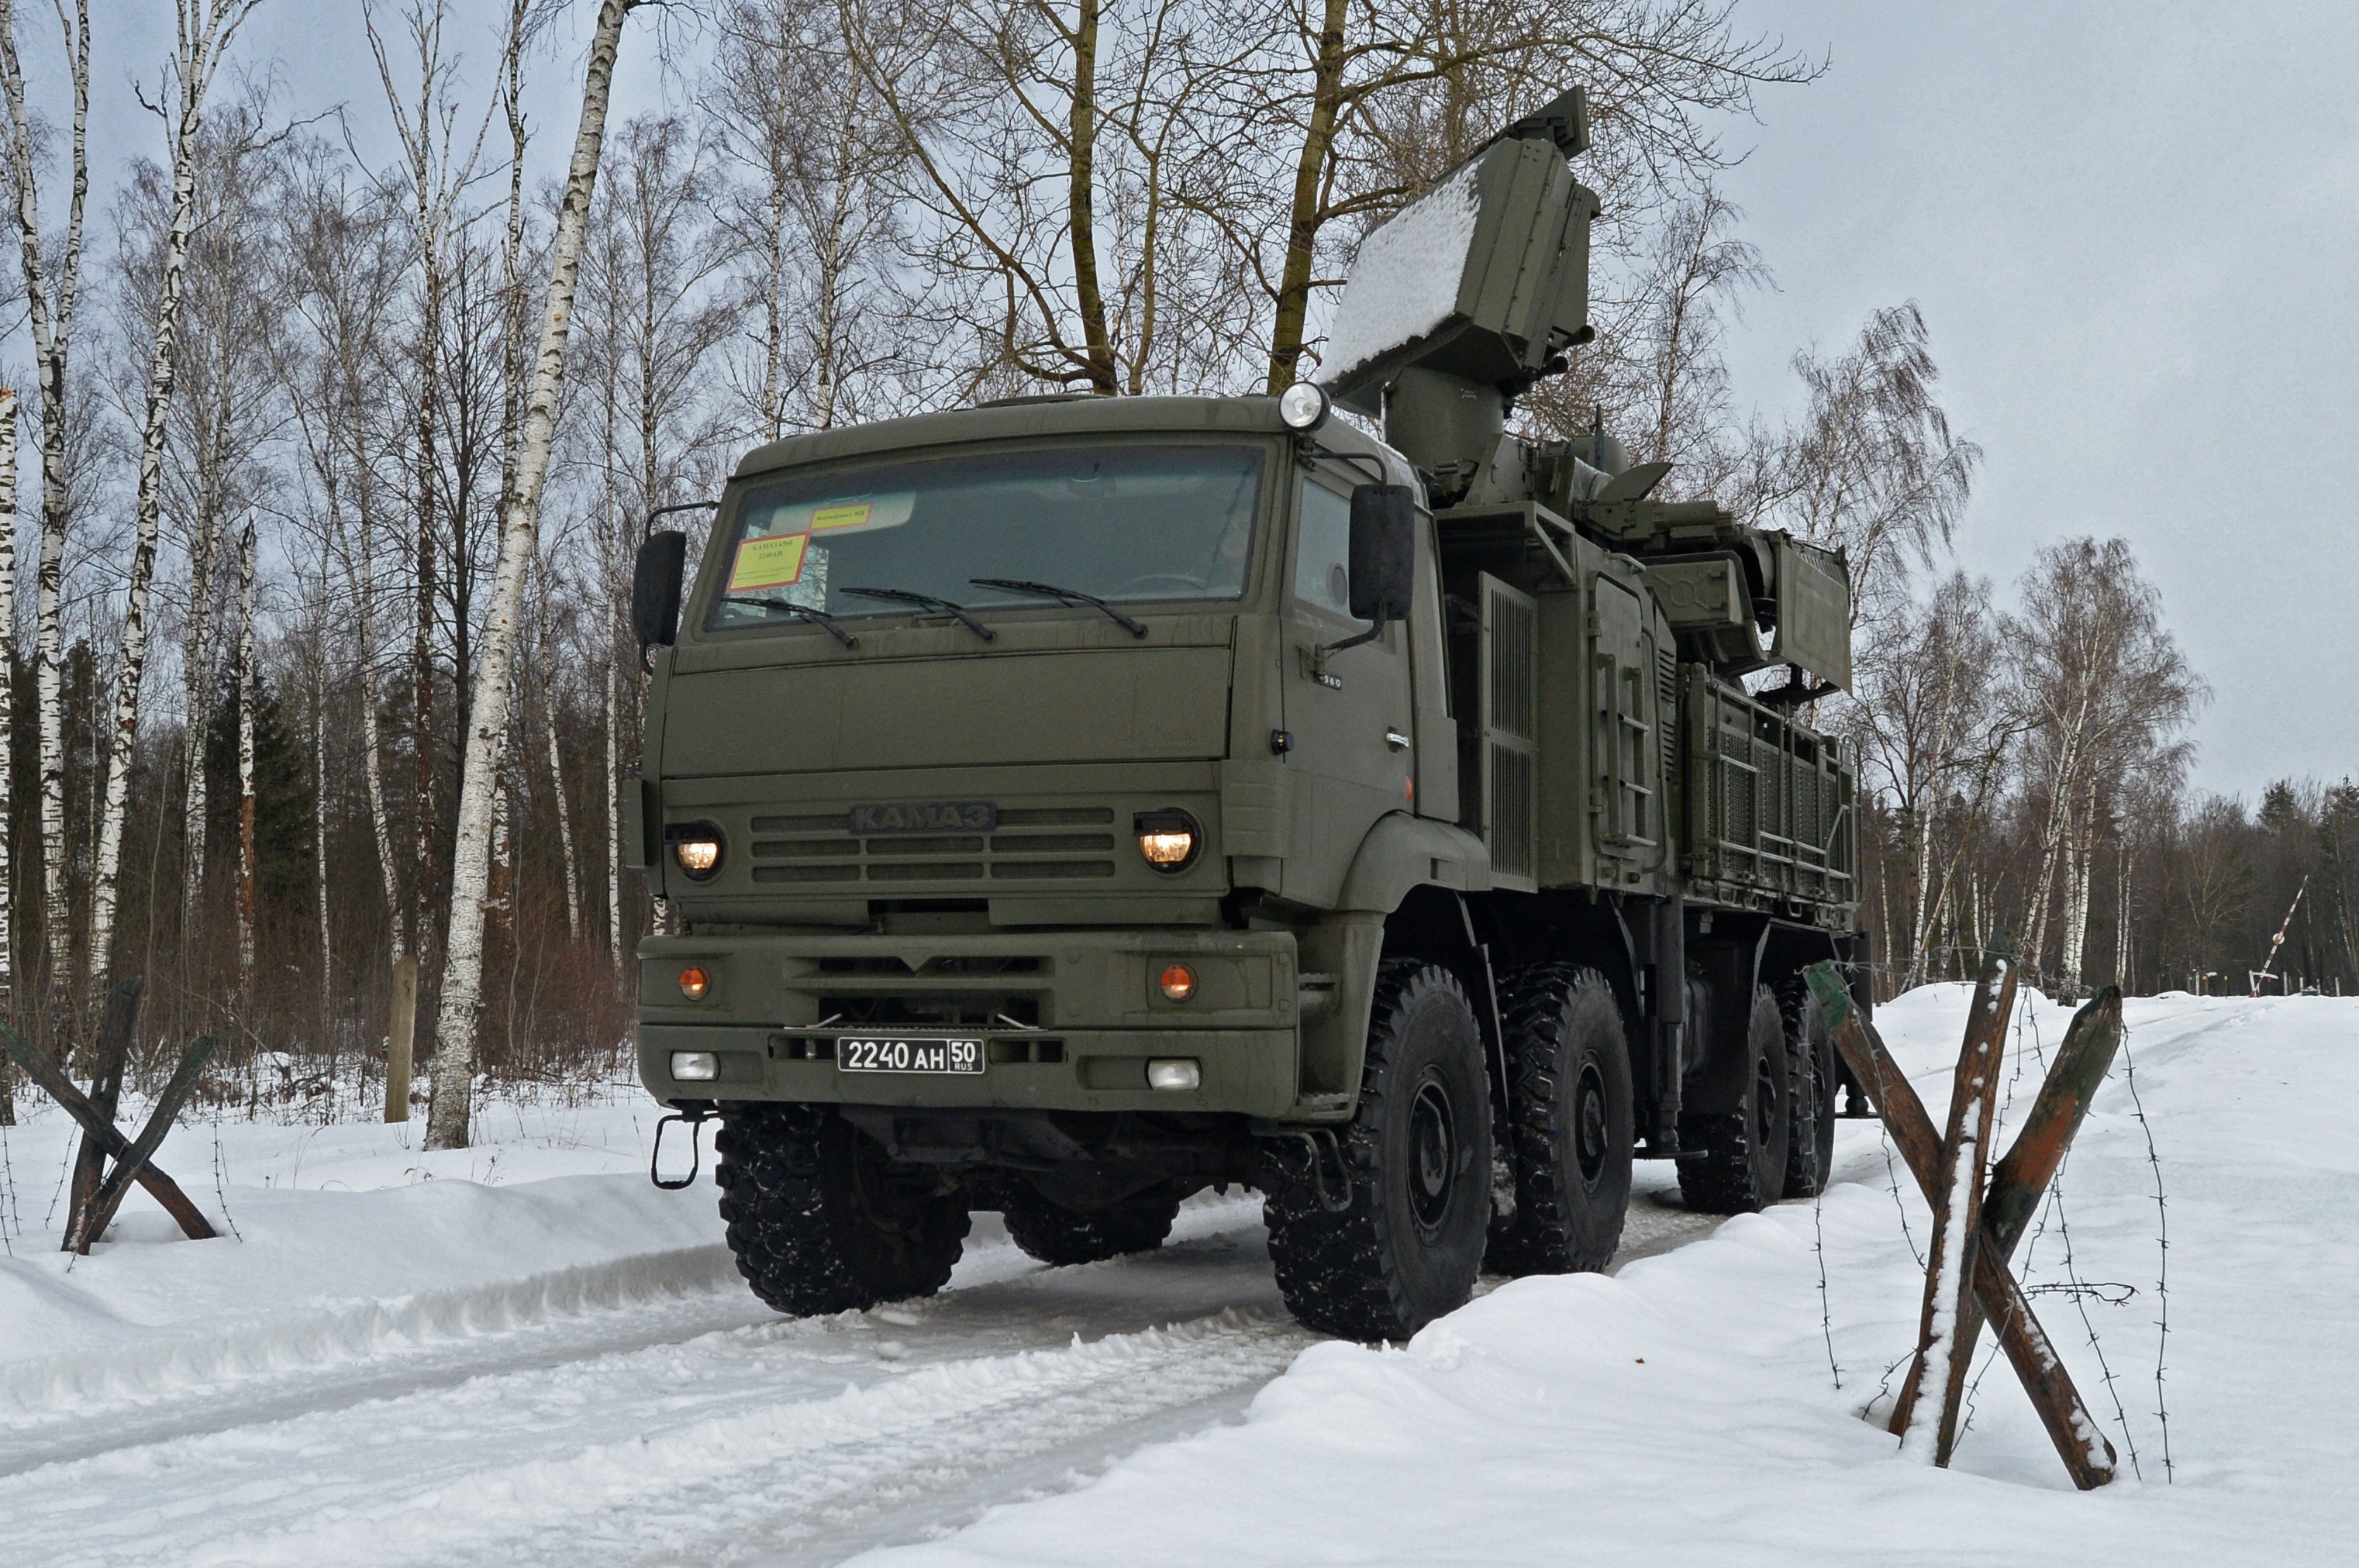 The Pantsir-S1 short-to-medium range gun-missile system on the march